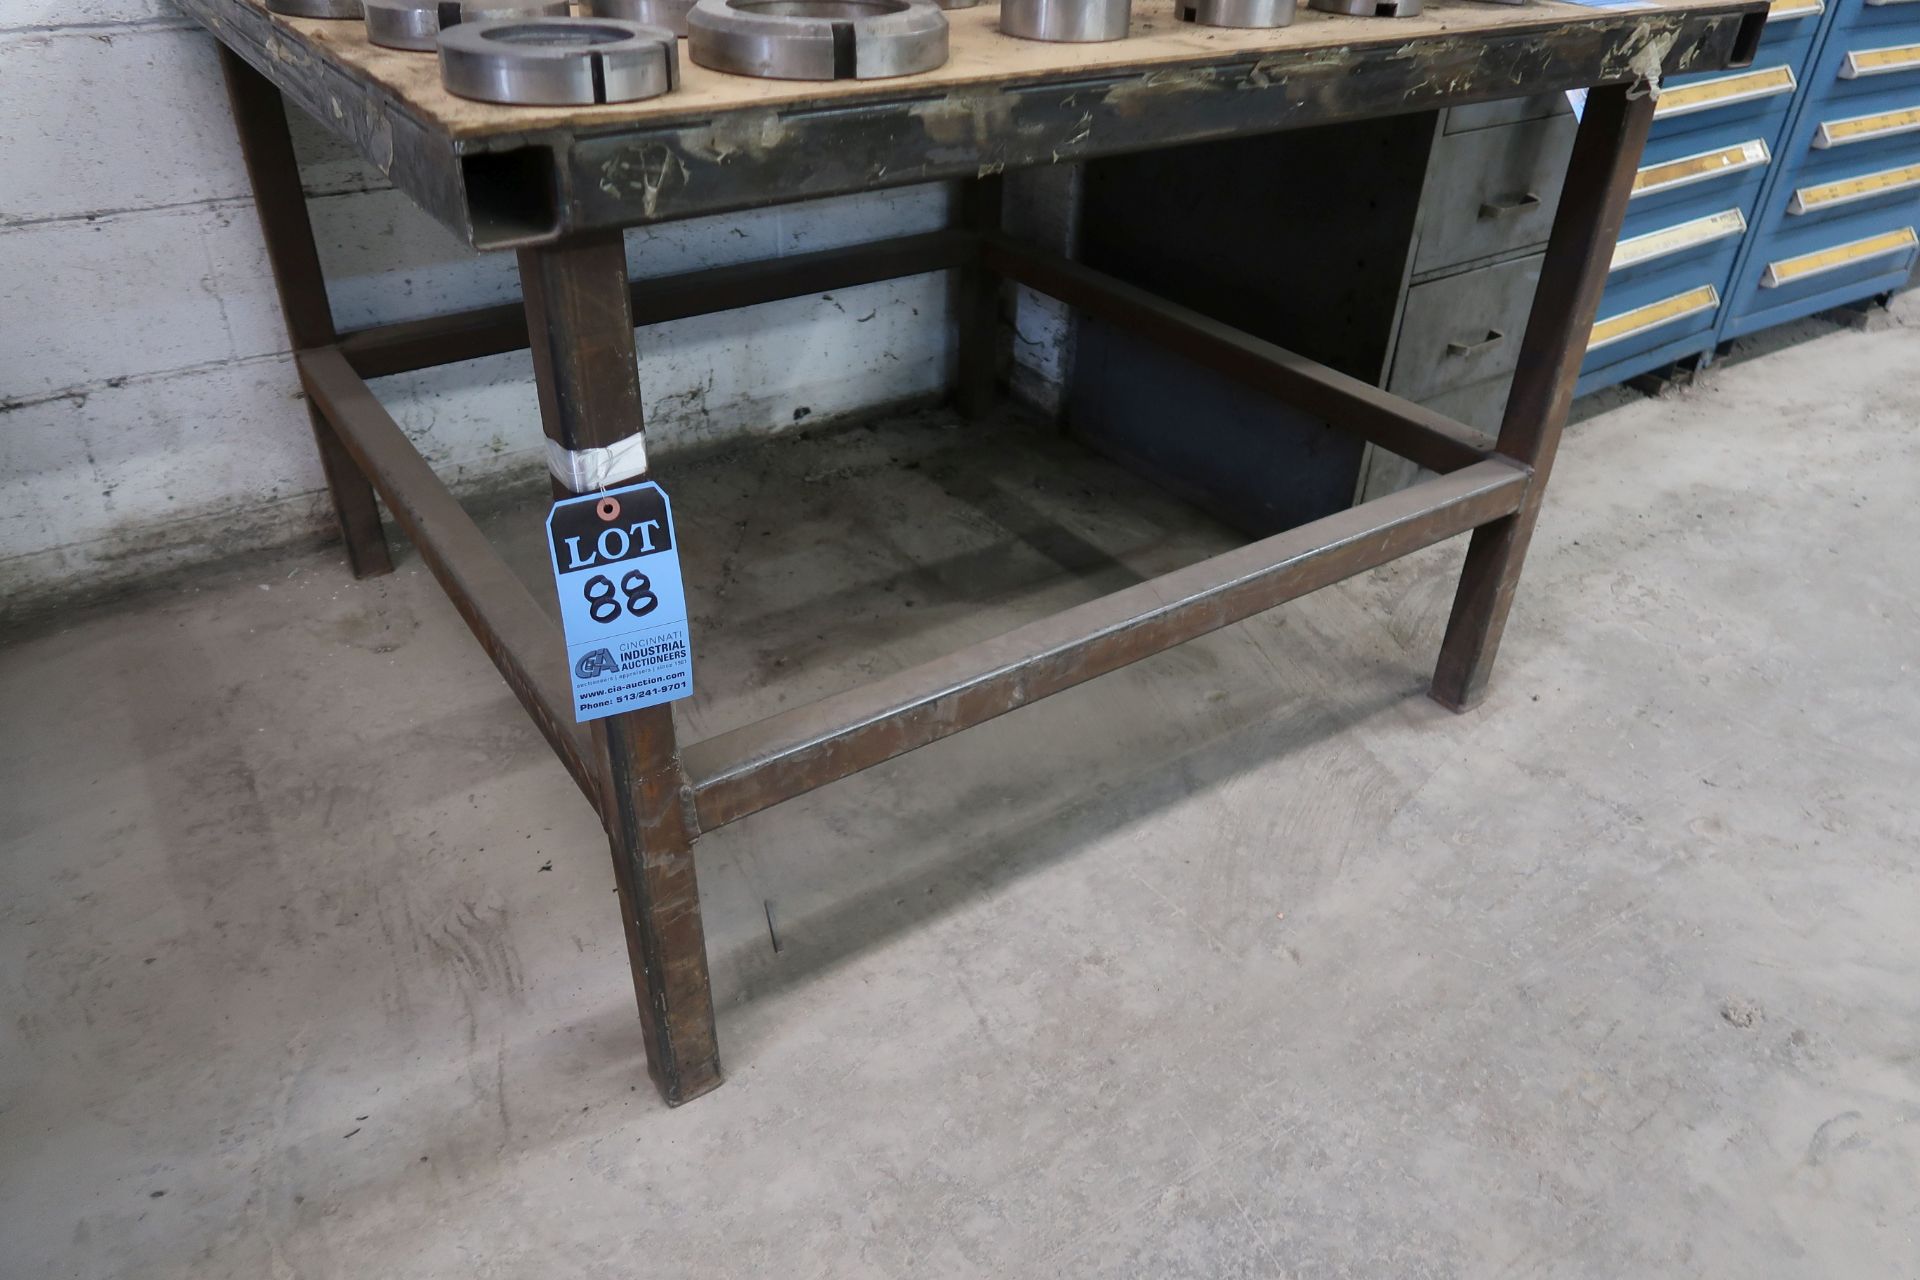 48" X 48" X 32" HIGH X 1/4" THICK STEEL TOP PLATE HEAVY DUTY STEEL FRAME TABLE **DELAY REMOVAL -